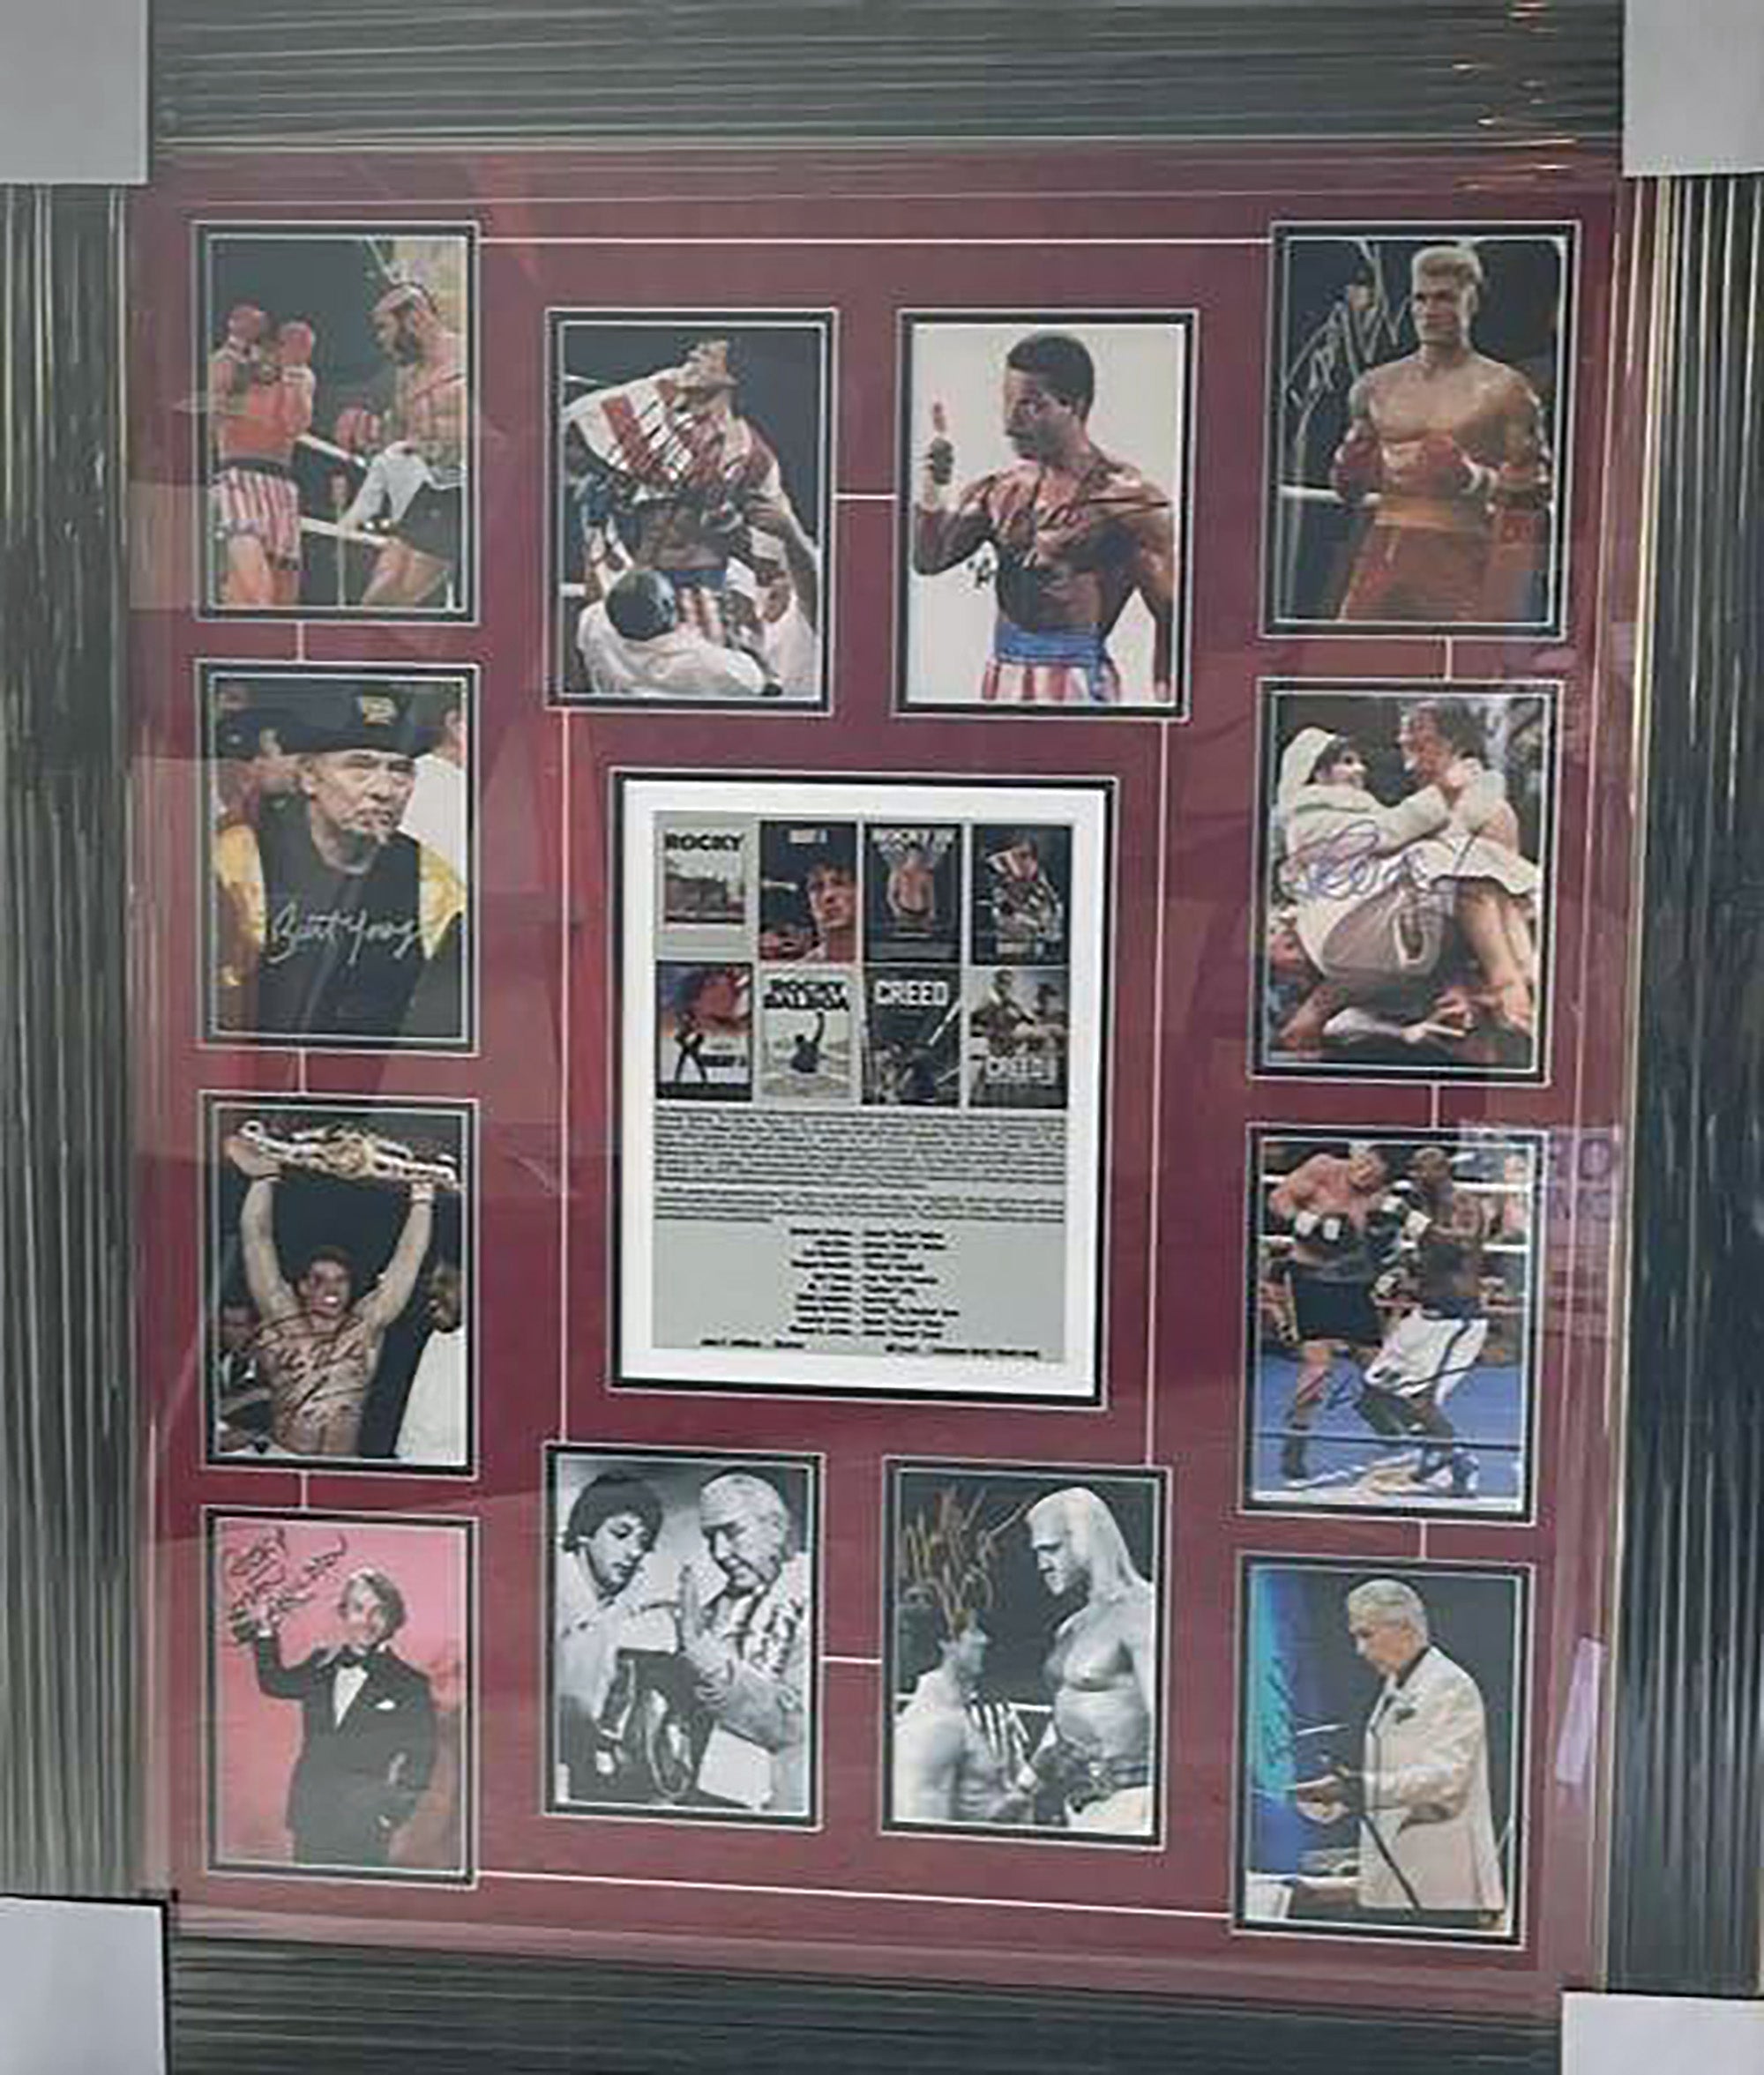 Rocky Sylvester Stallone, Burgess Meredith, Carl Weathers signed and framed cast signed  and framed with proof